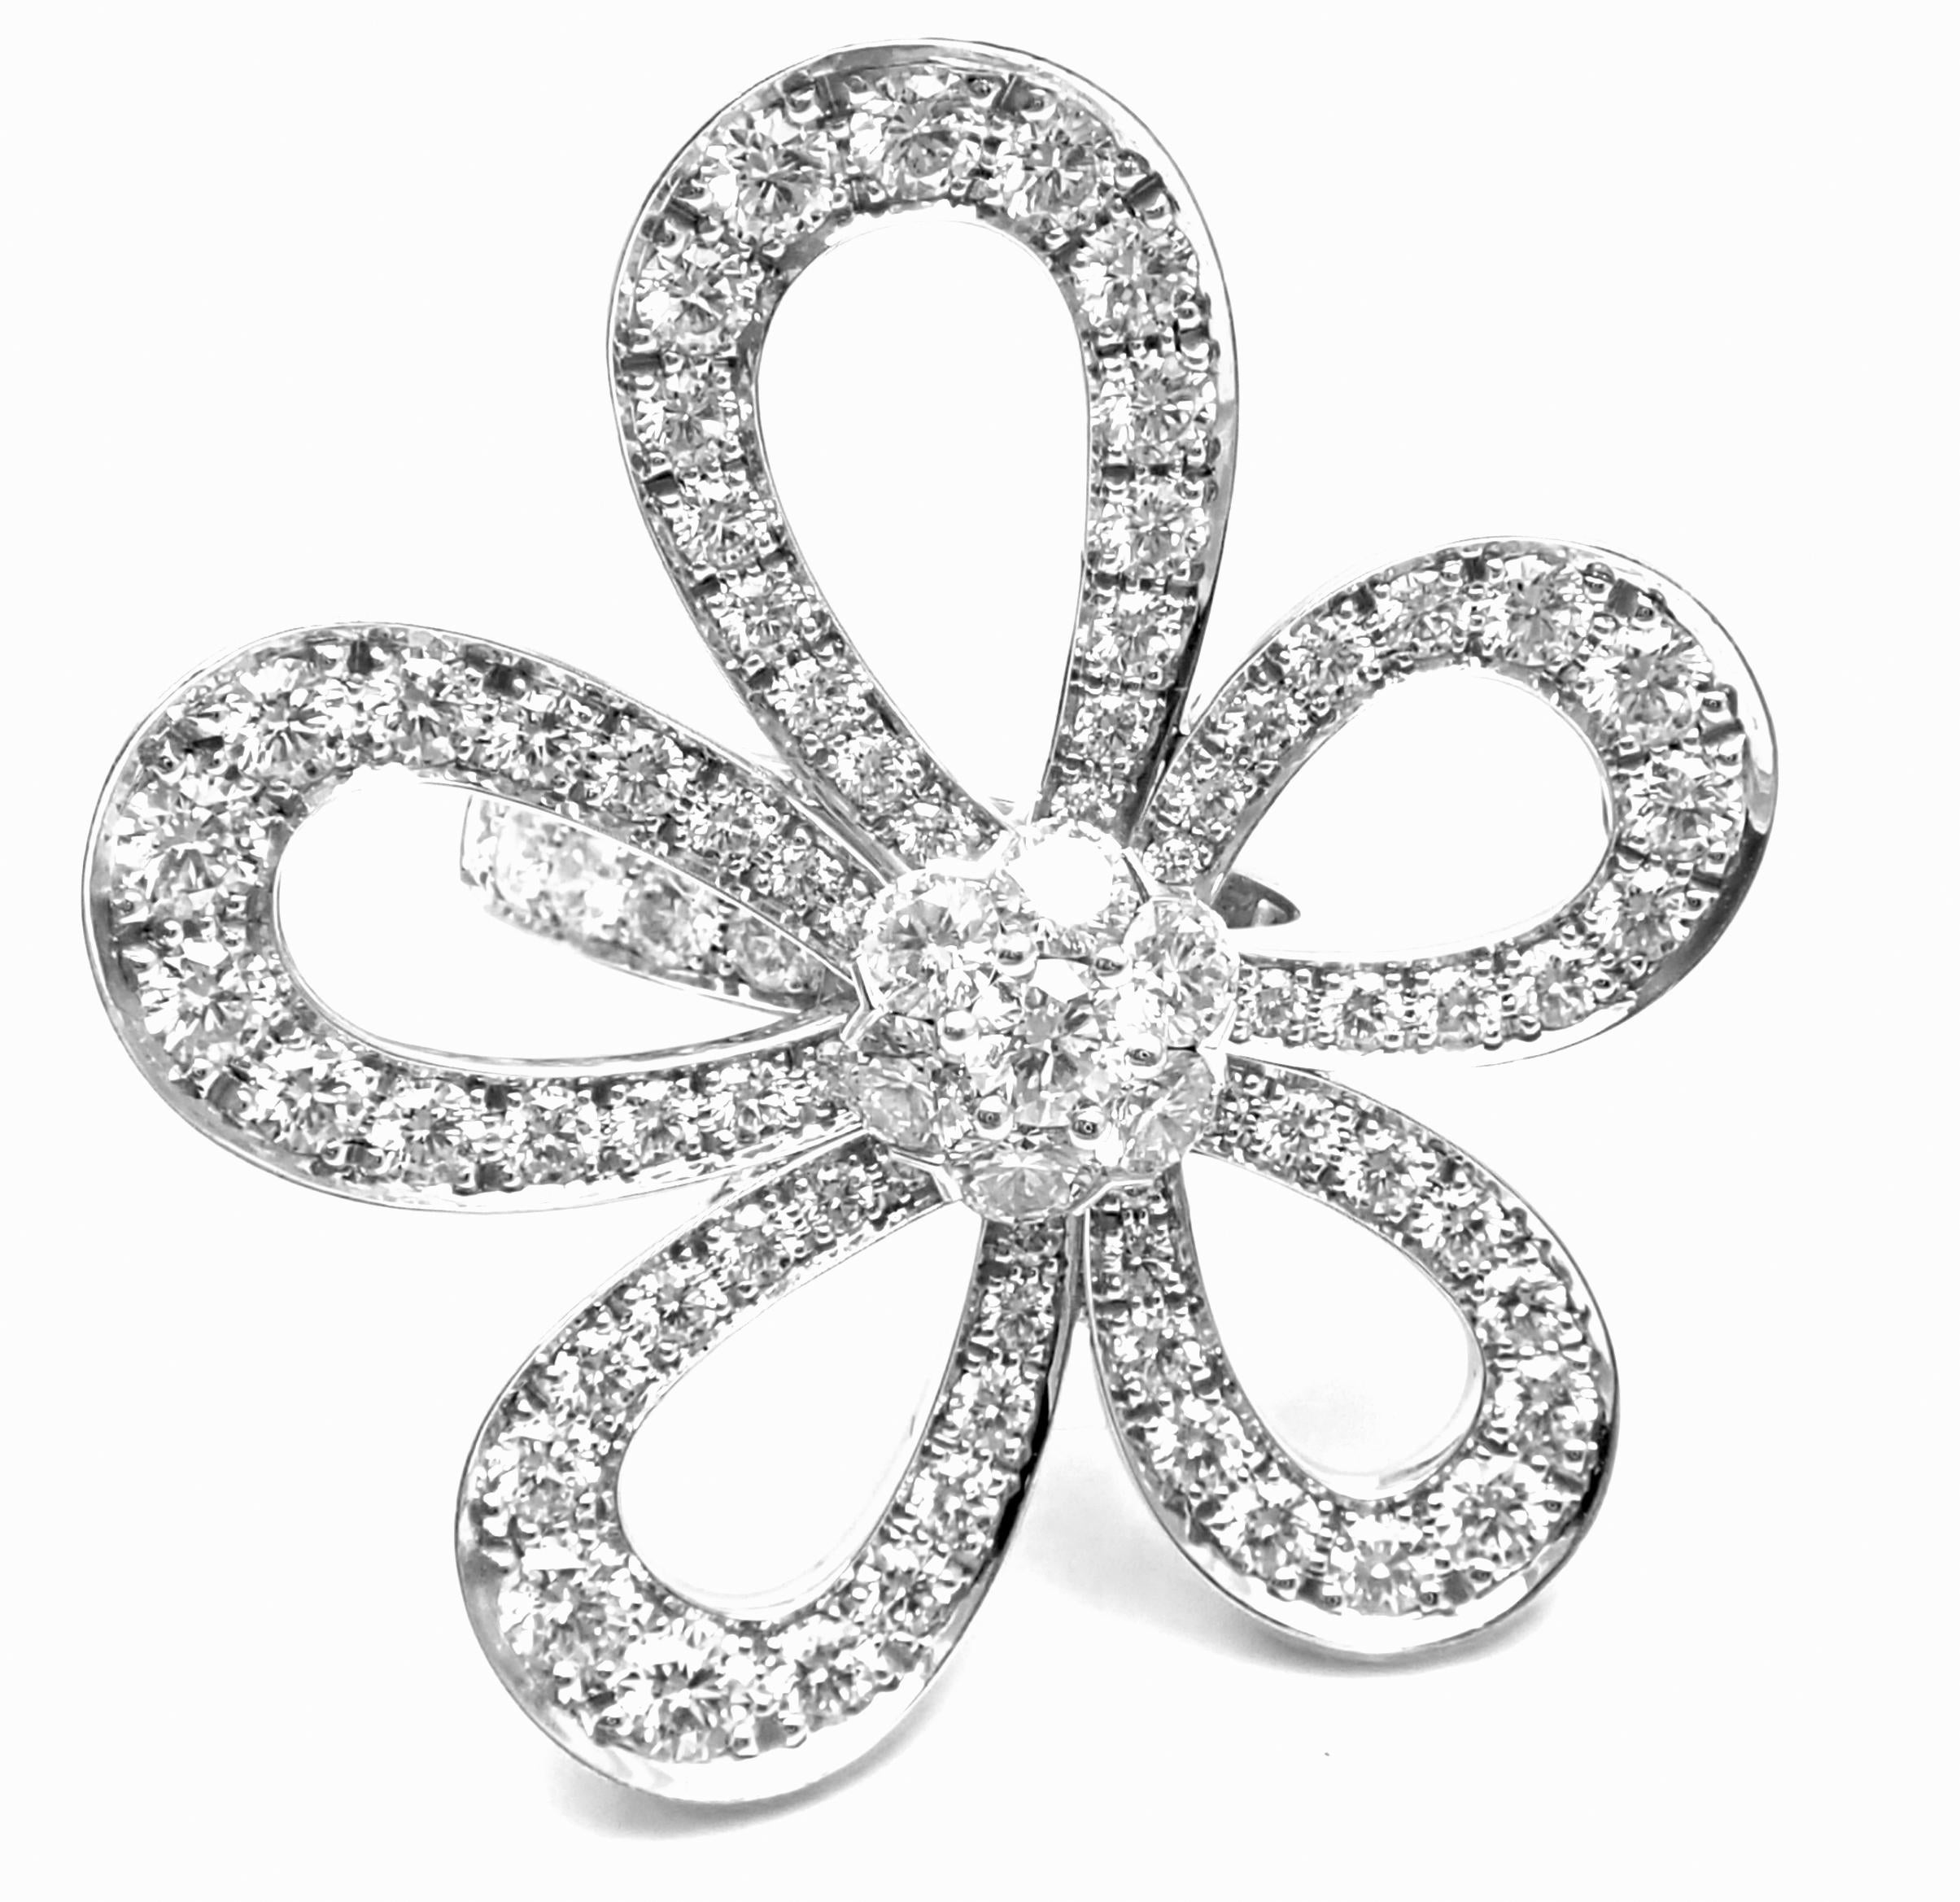 18k White Gold Flowerlace Diamond Large Ring by Van Cleef & Arpels. 
With 87 Round brilliant cut diamonds VVS1 clarity, E color total weight approx. 2.66ct
Details: 
Size: European 50, US 5 1/4 (resizing is available)
Width: 34mm
Weight: 13.8